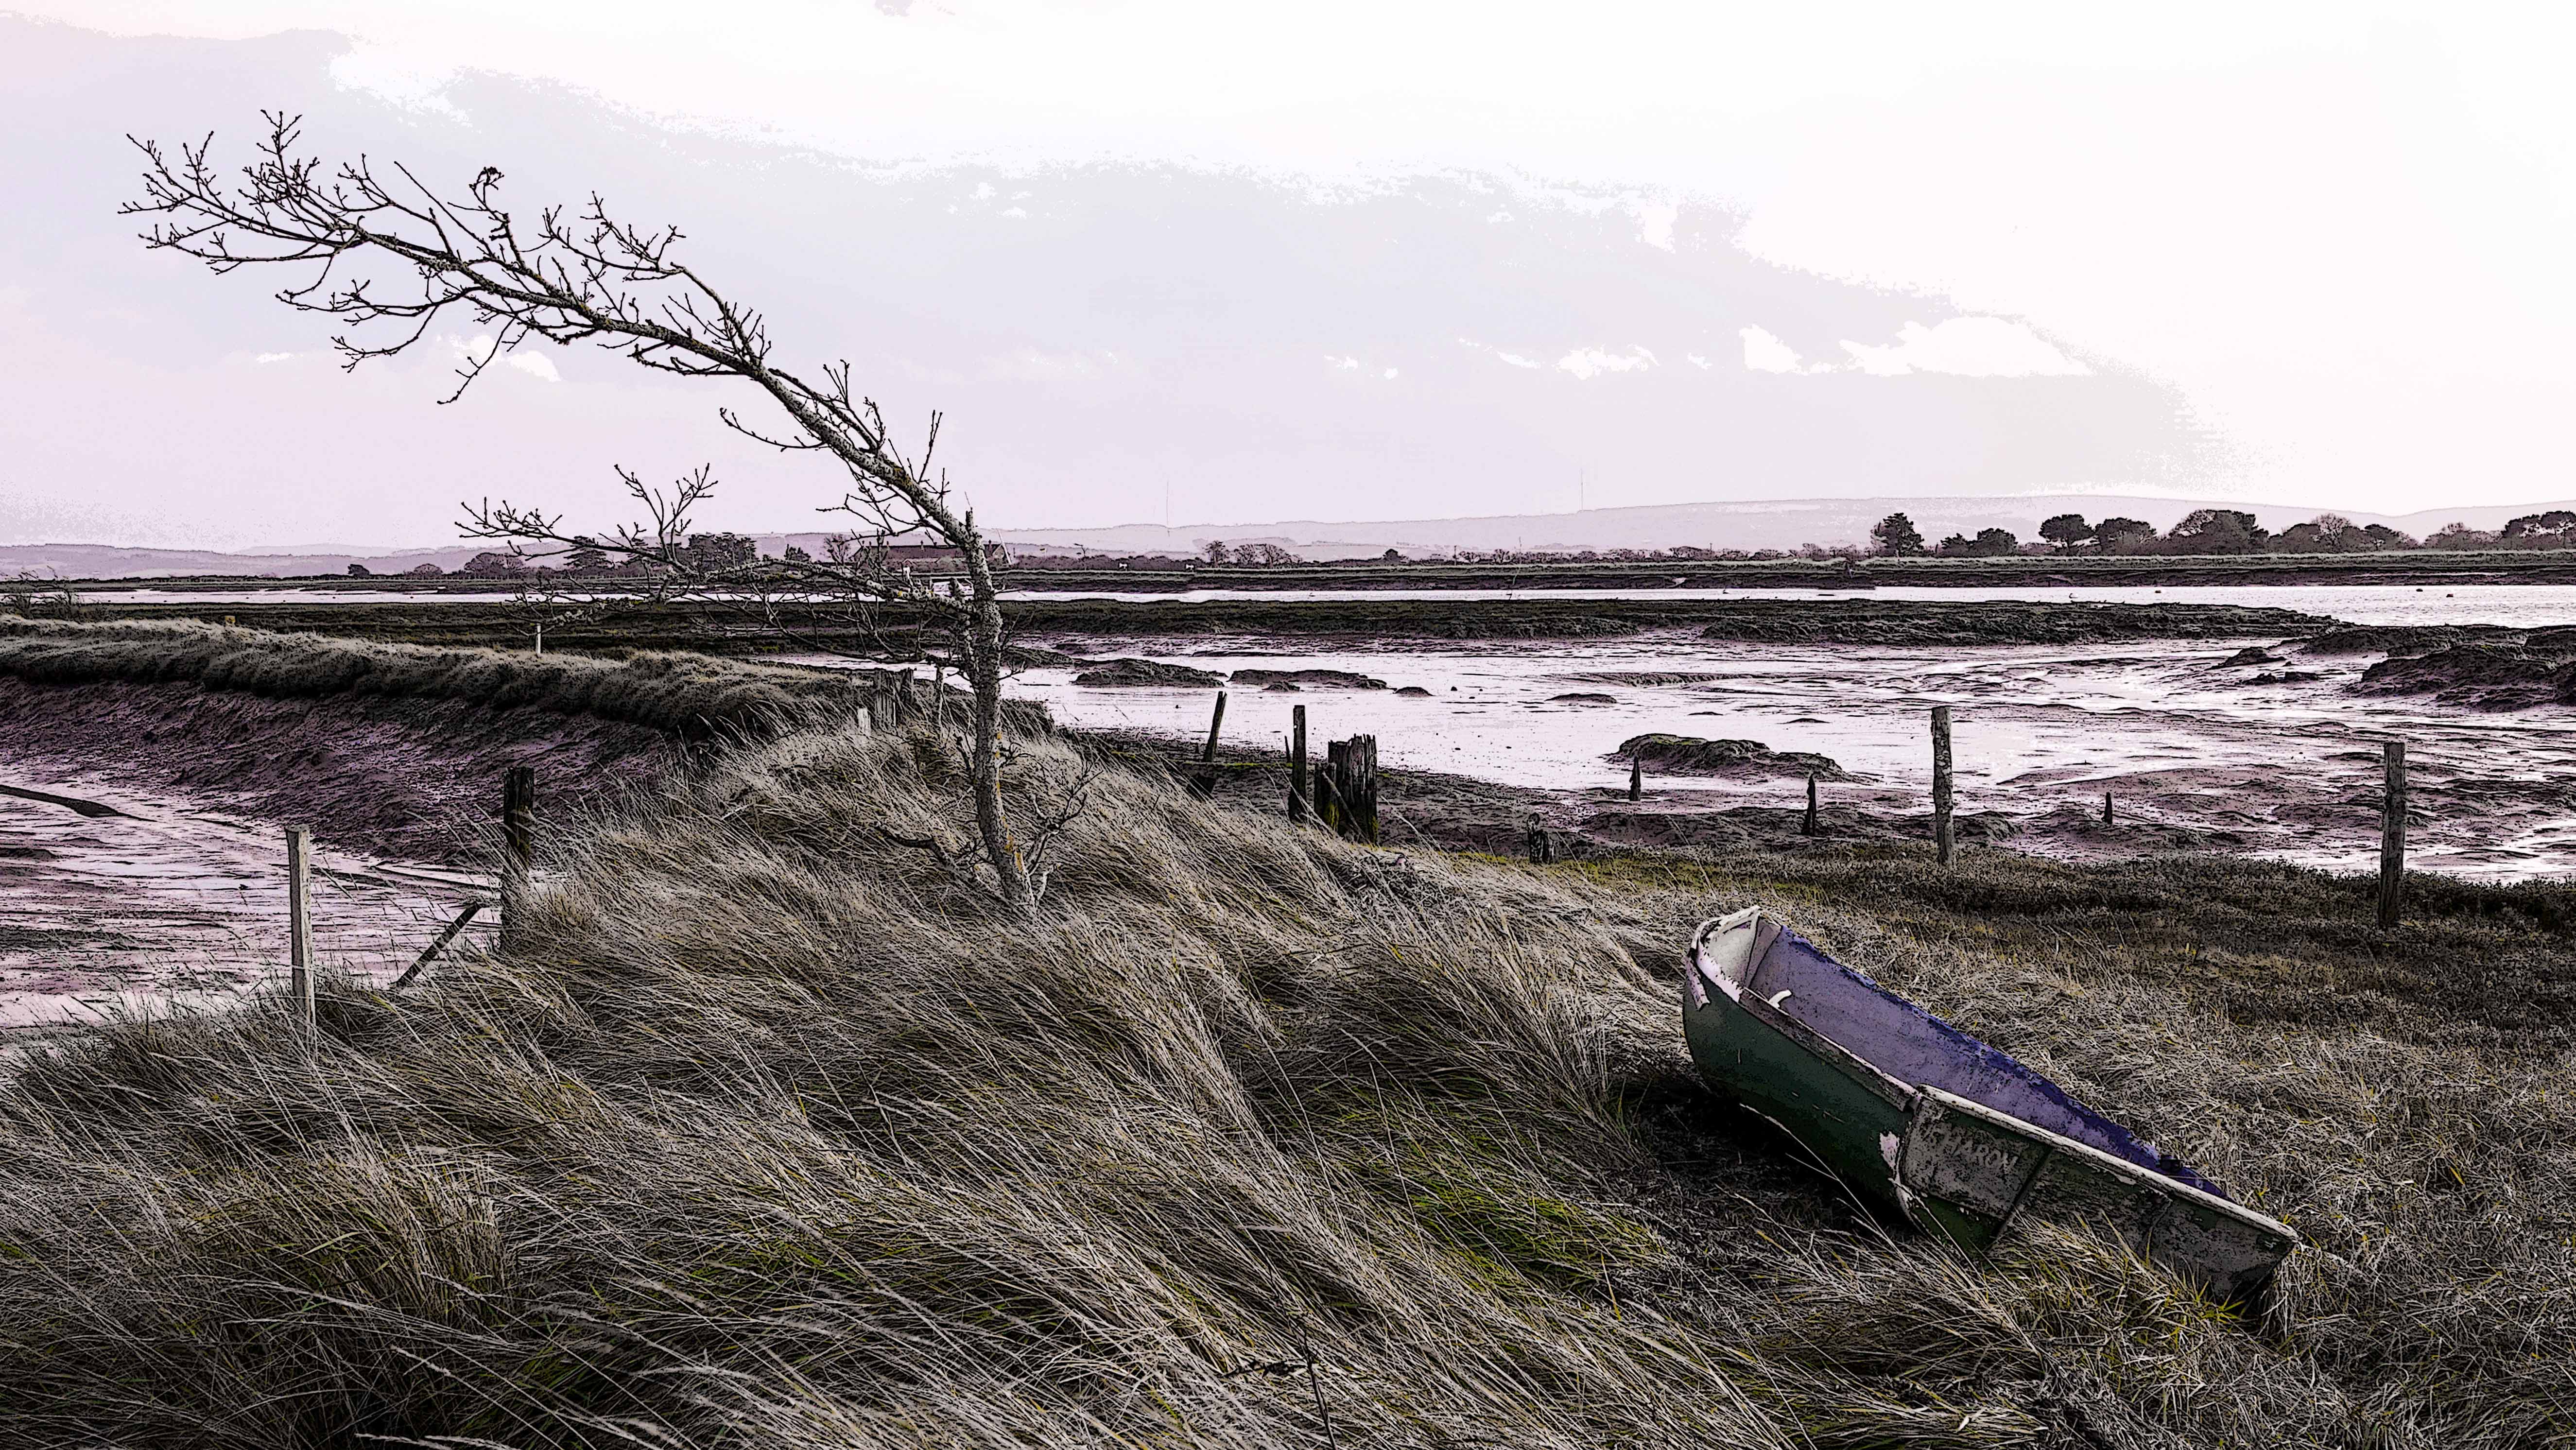 Windswept Lower Exbury marshes, Sharon is the name on the dinghy